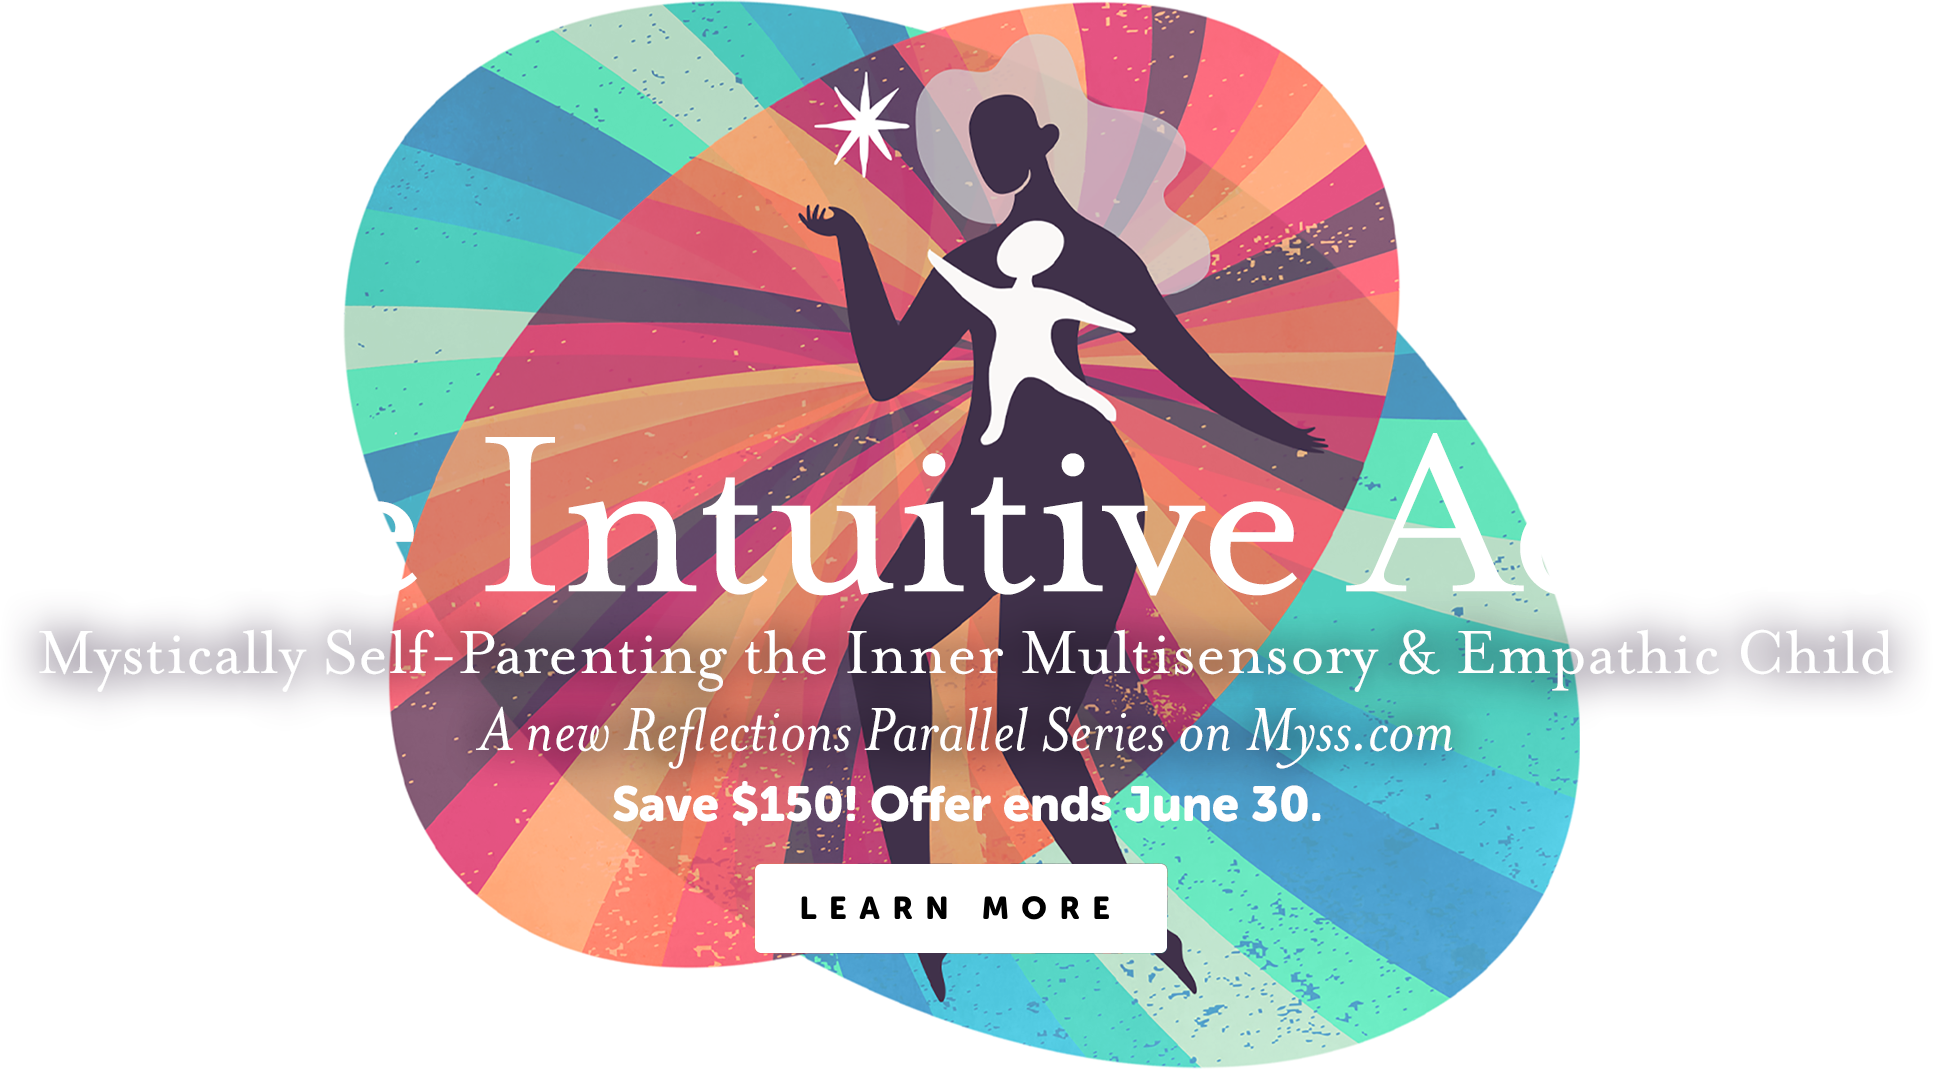 The Intuitive Adult - Save $150! Offer ends June 30.